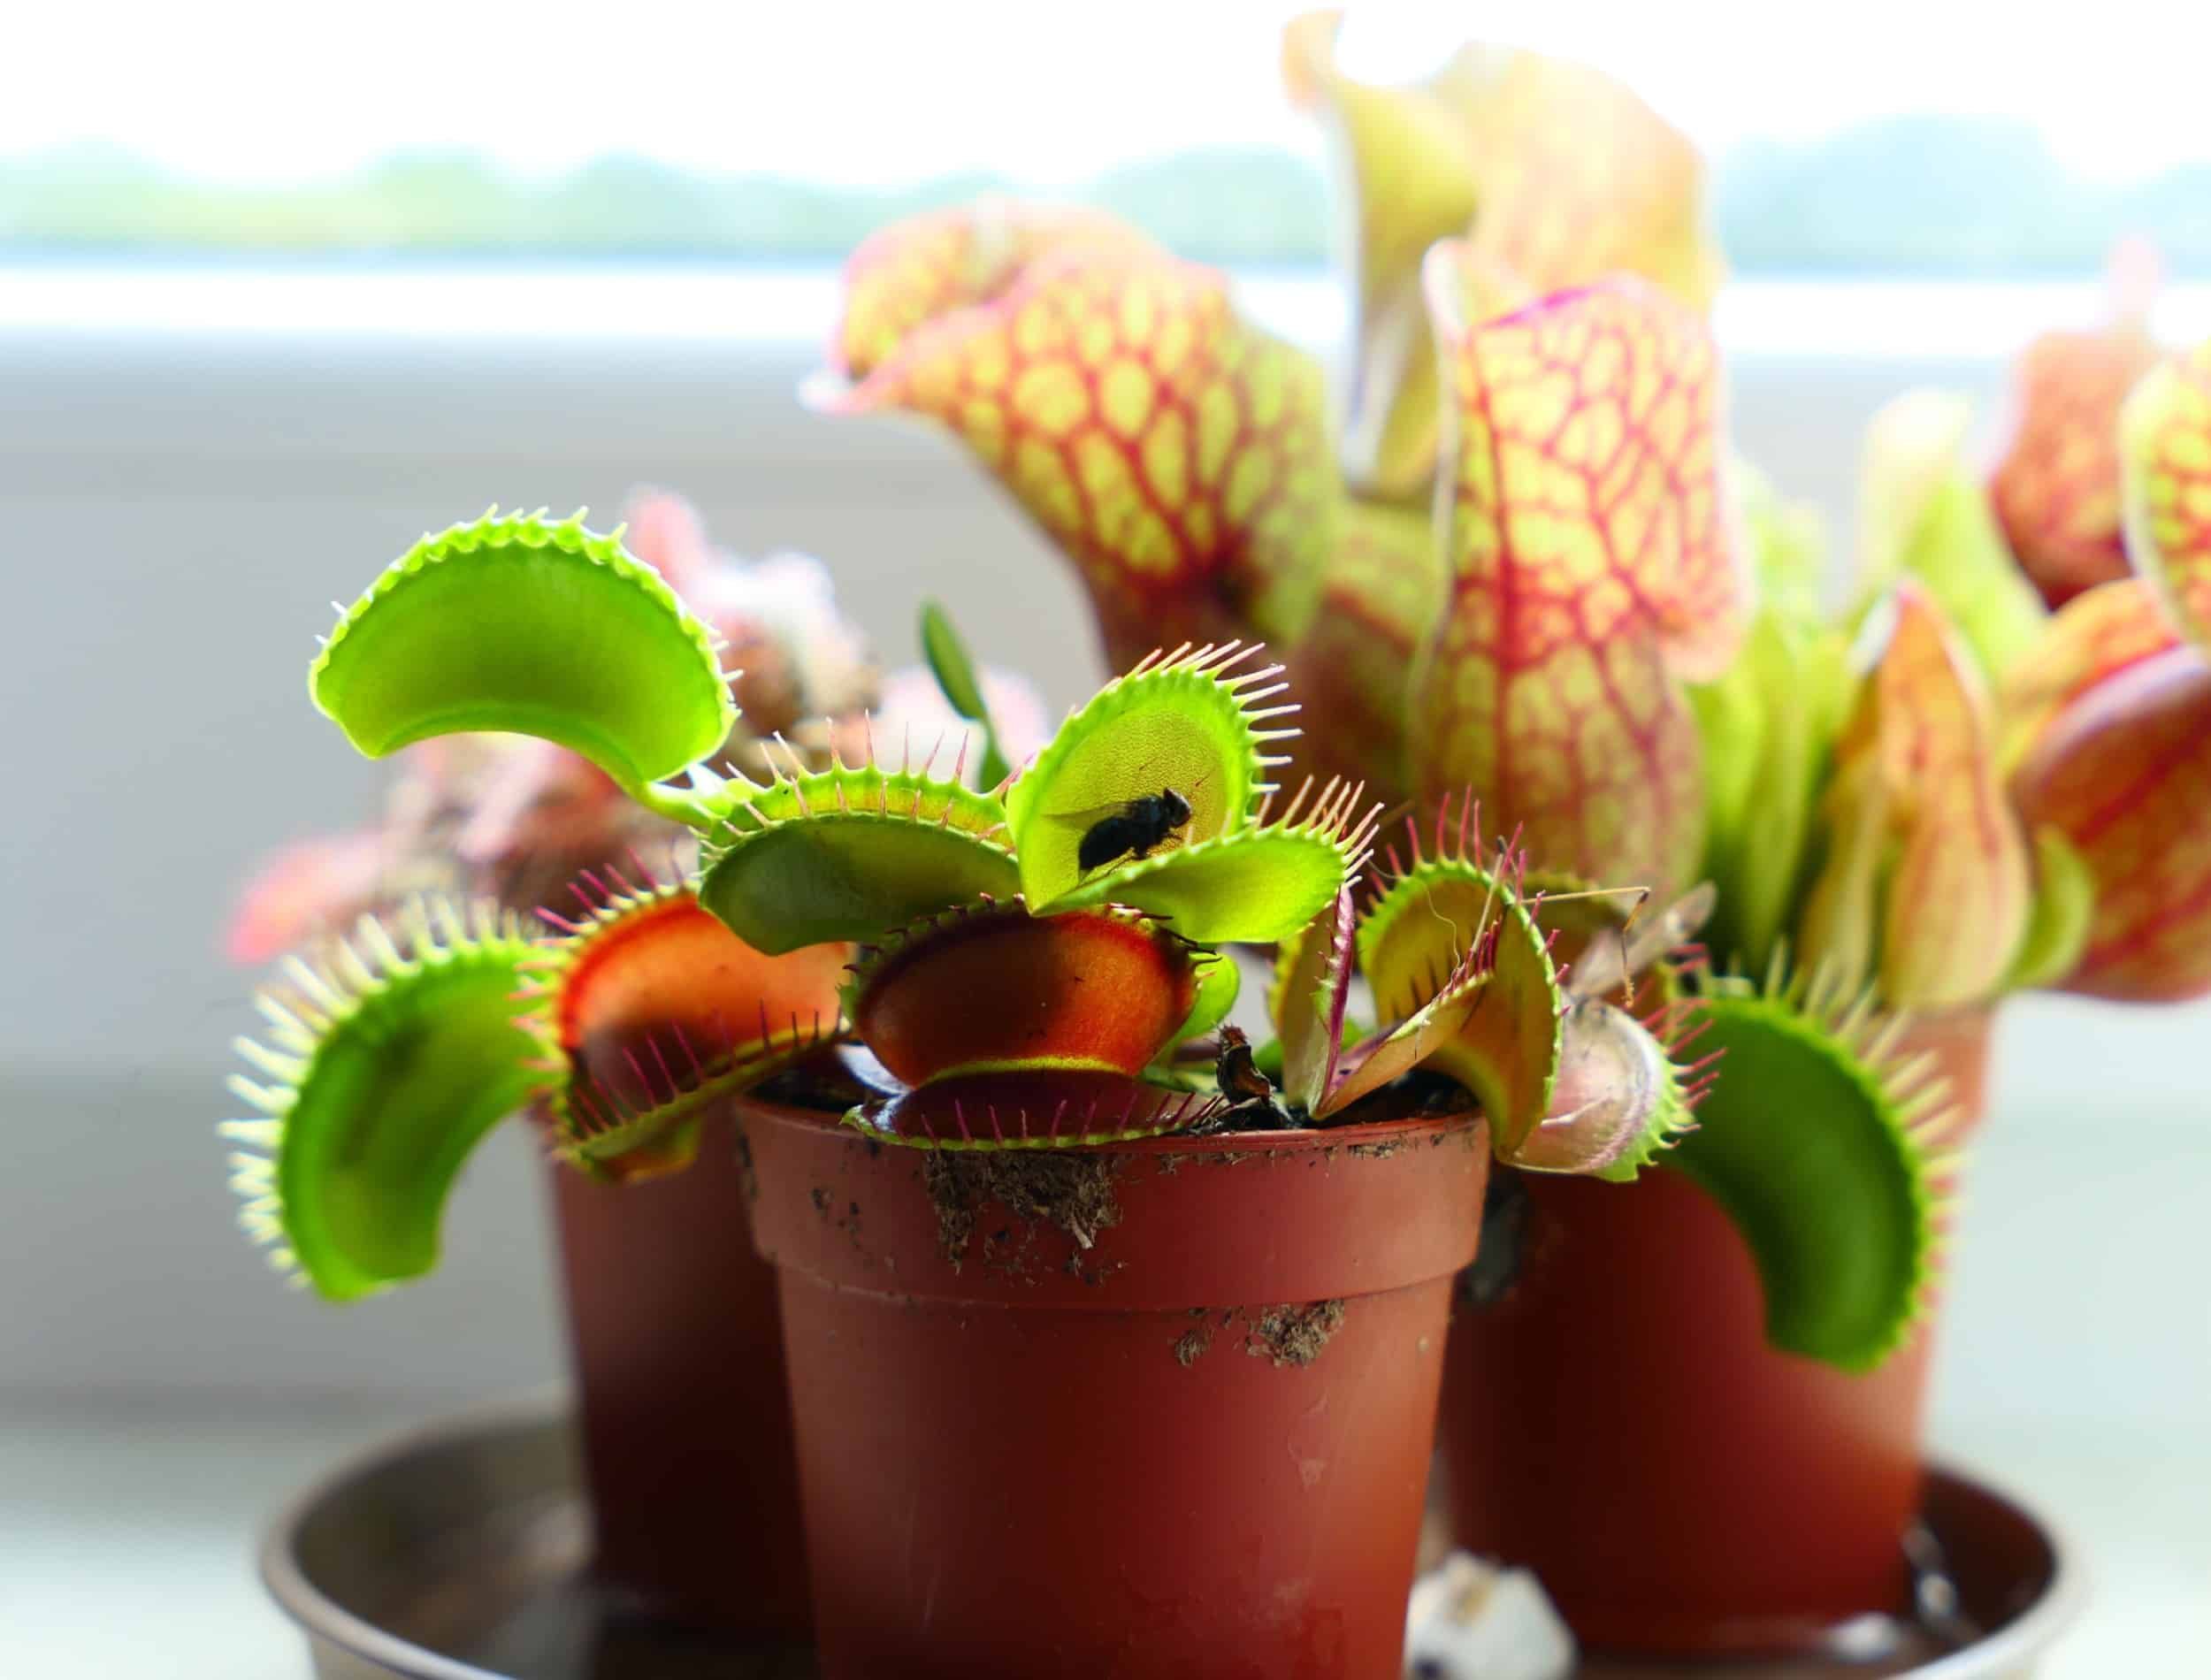 Carnivorous plants grown at home